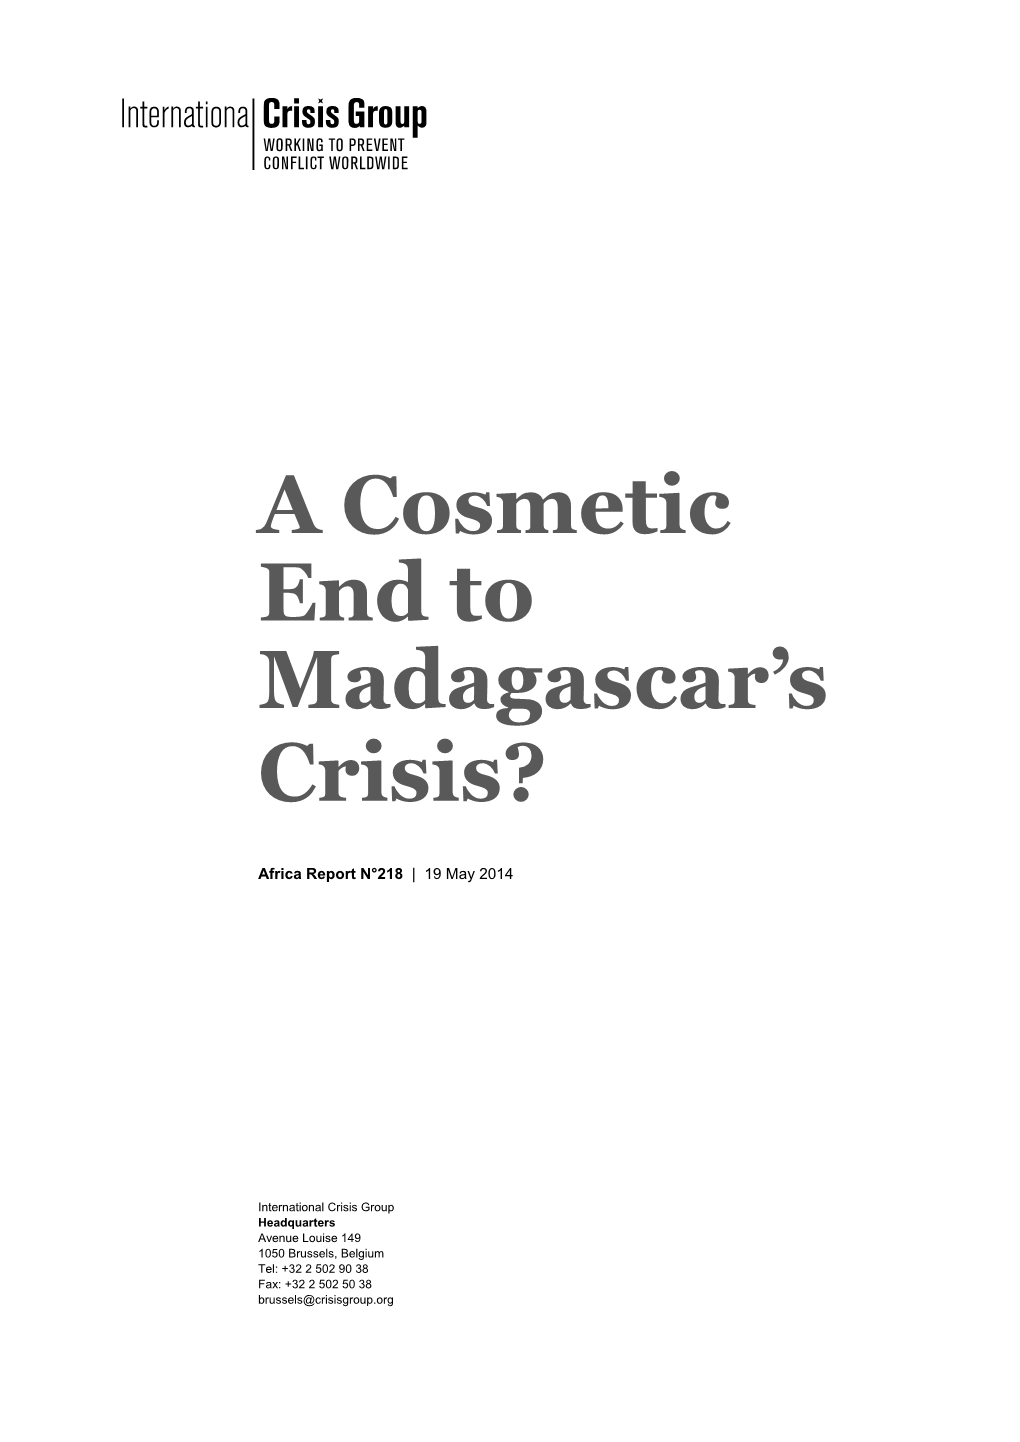 A Cosmetic End to Madagascar's Crisis?